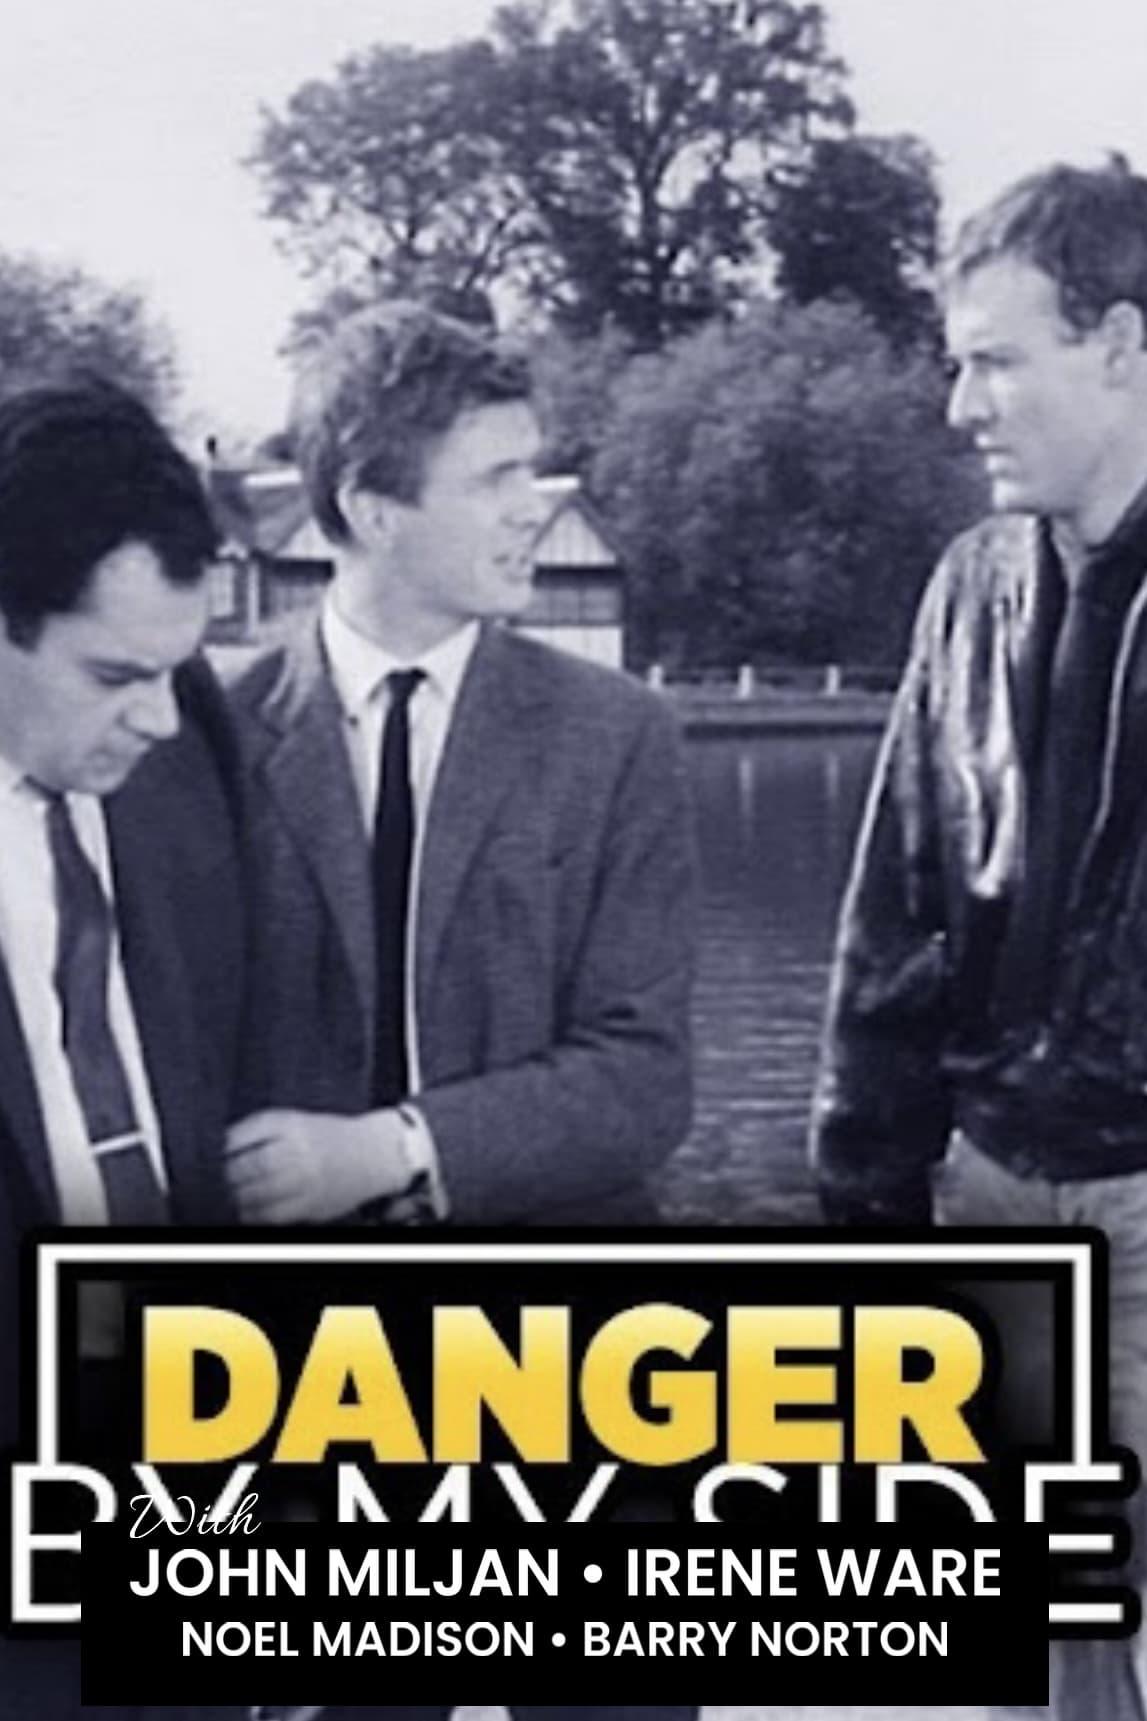 Danger by My Side poster